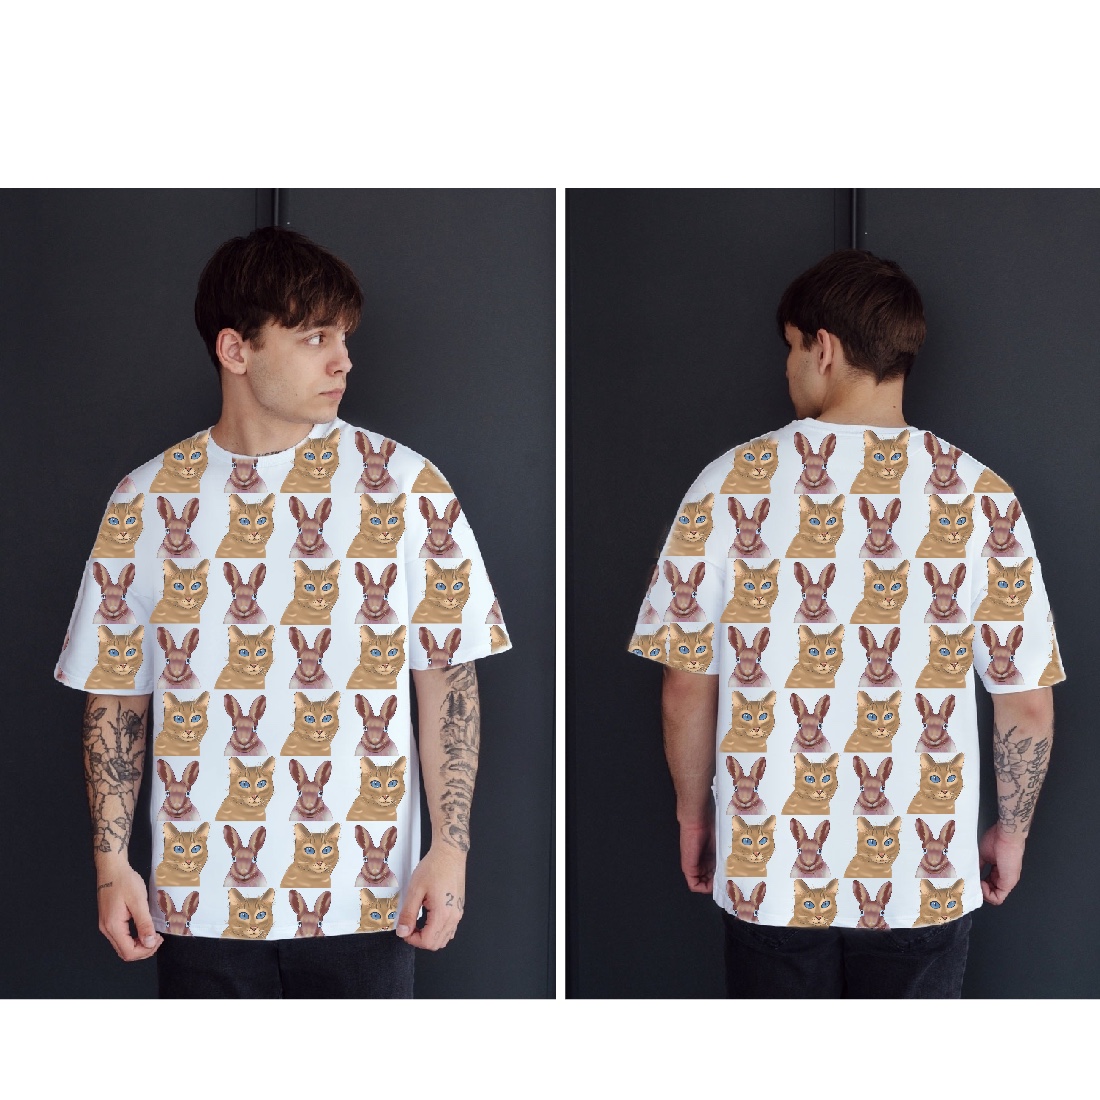 Rabbit and Cat Patterns Design preview image.